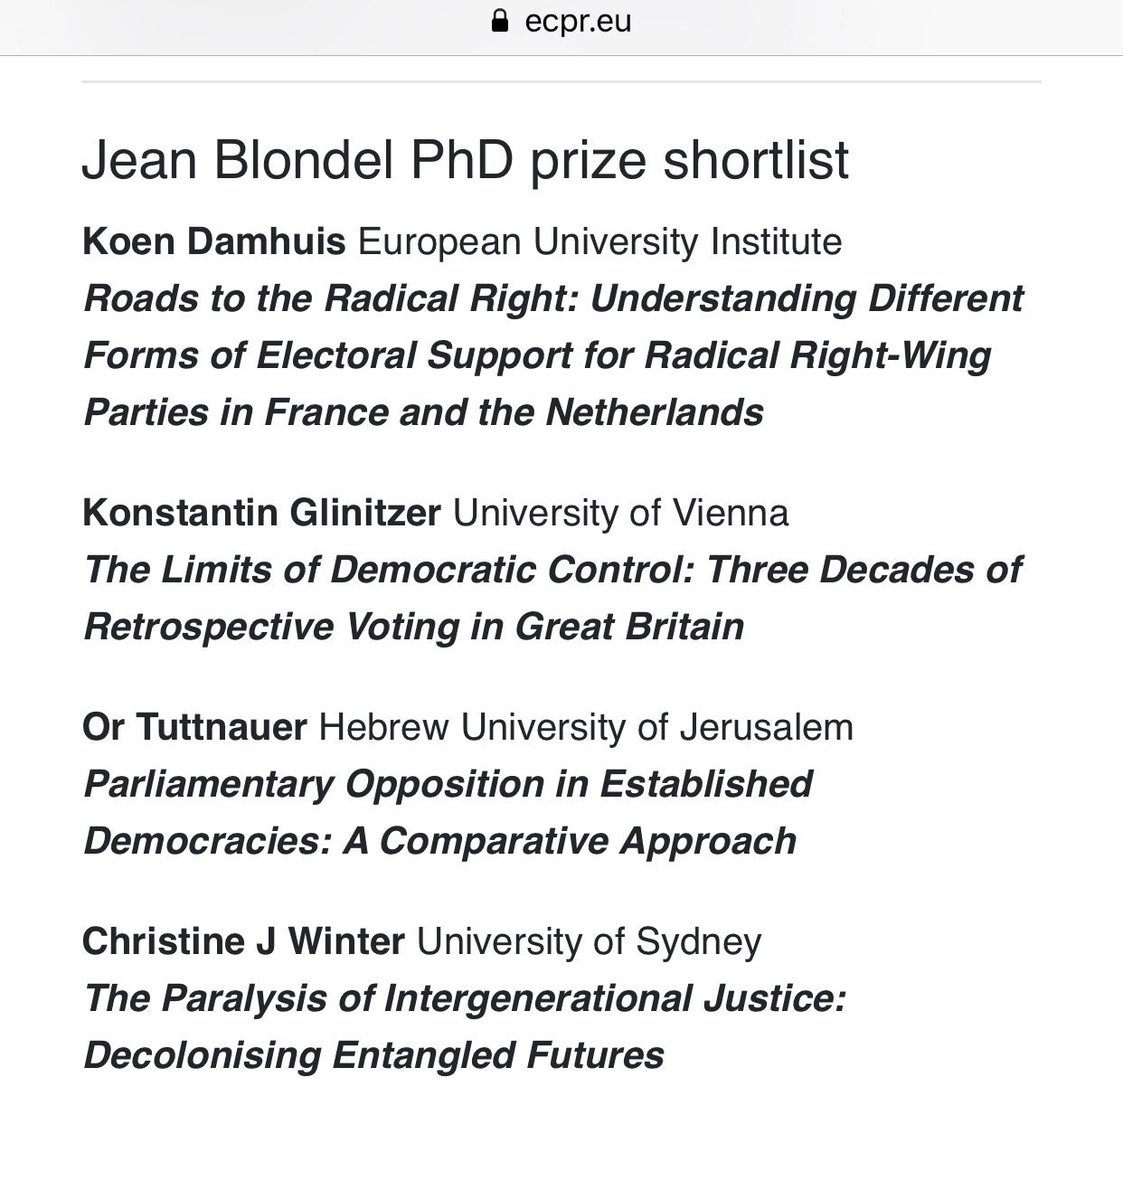 Congratulations to @GovtIr PhD graduate @WinterChristine on being shortlisted for the @ECPR Jean Blondel PhD prize! What a star 🤩